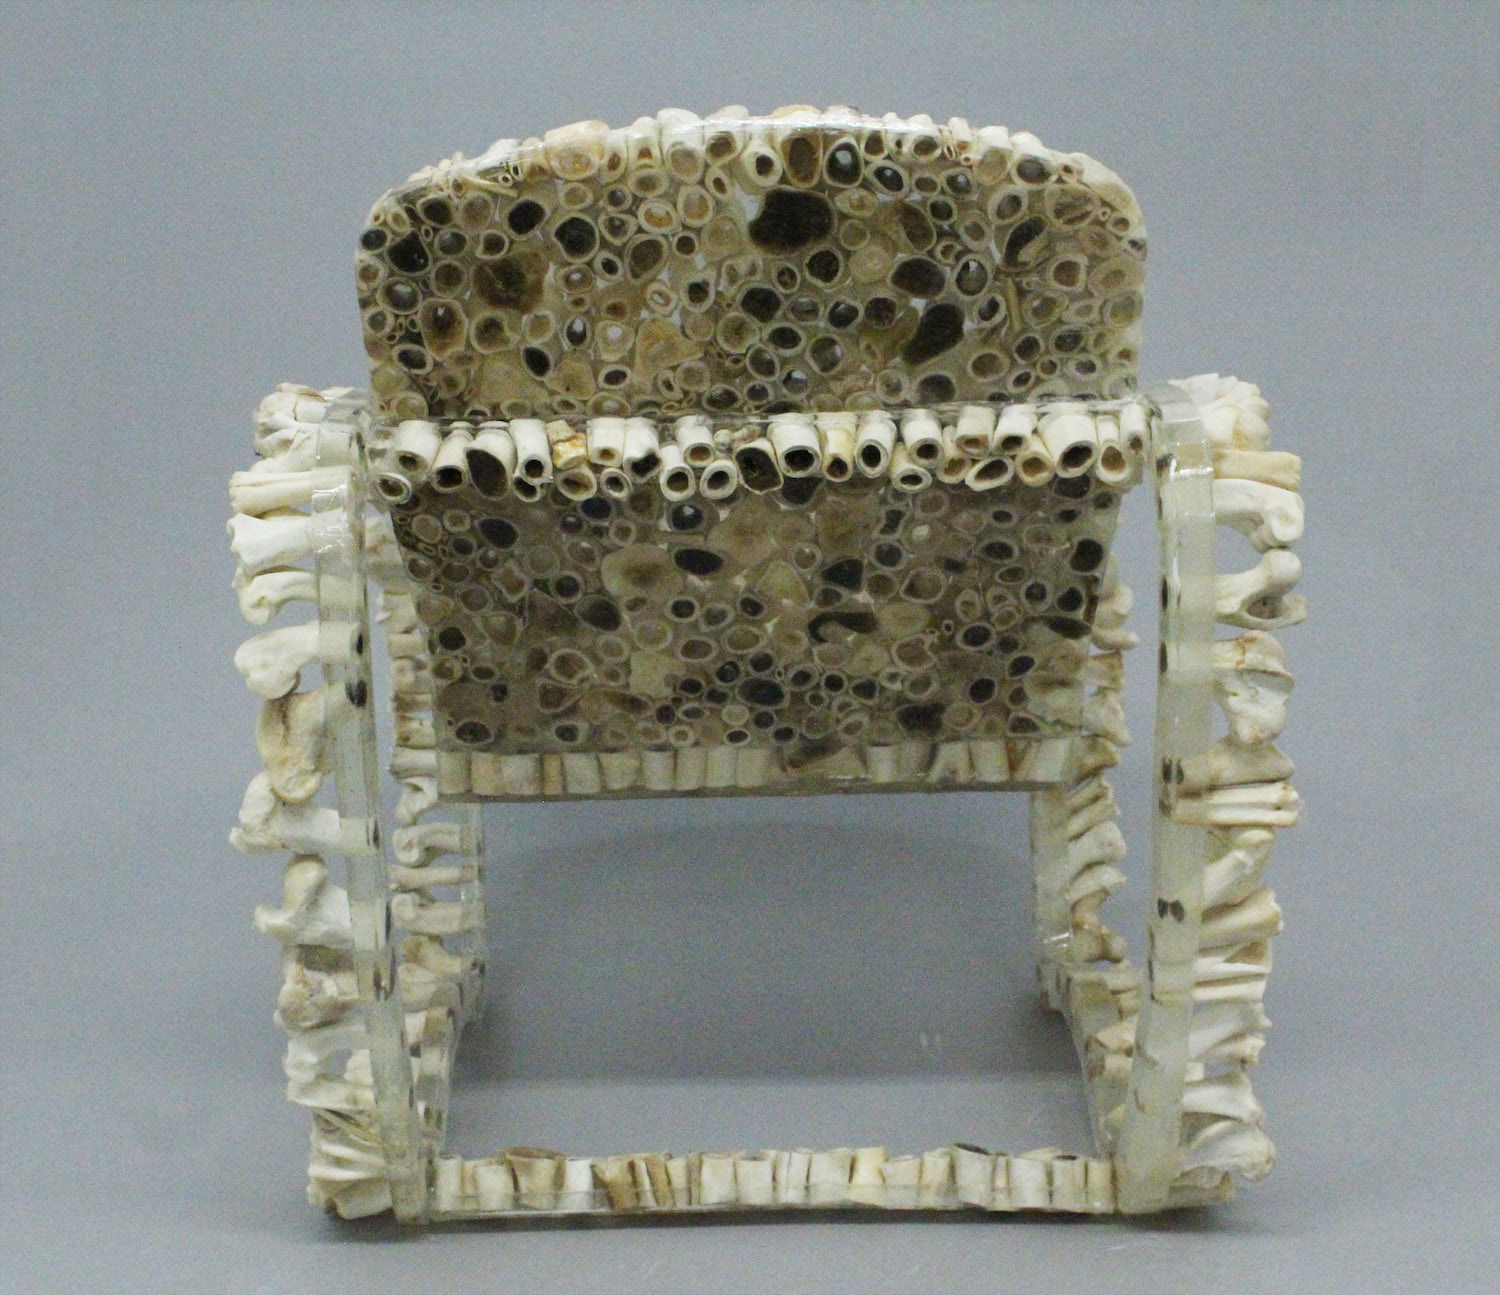 Back view of the Bone Chair.